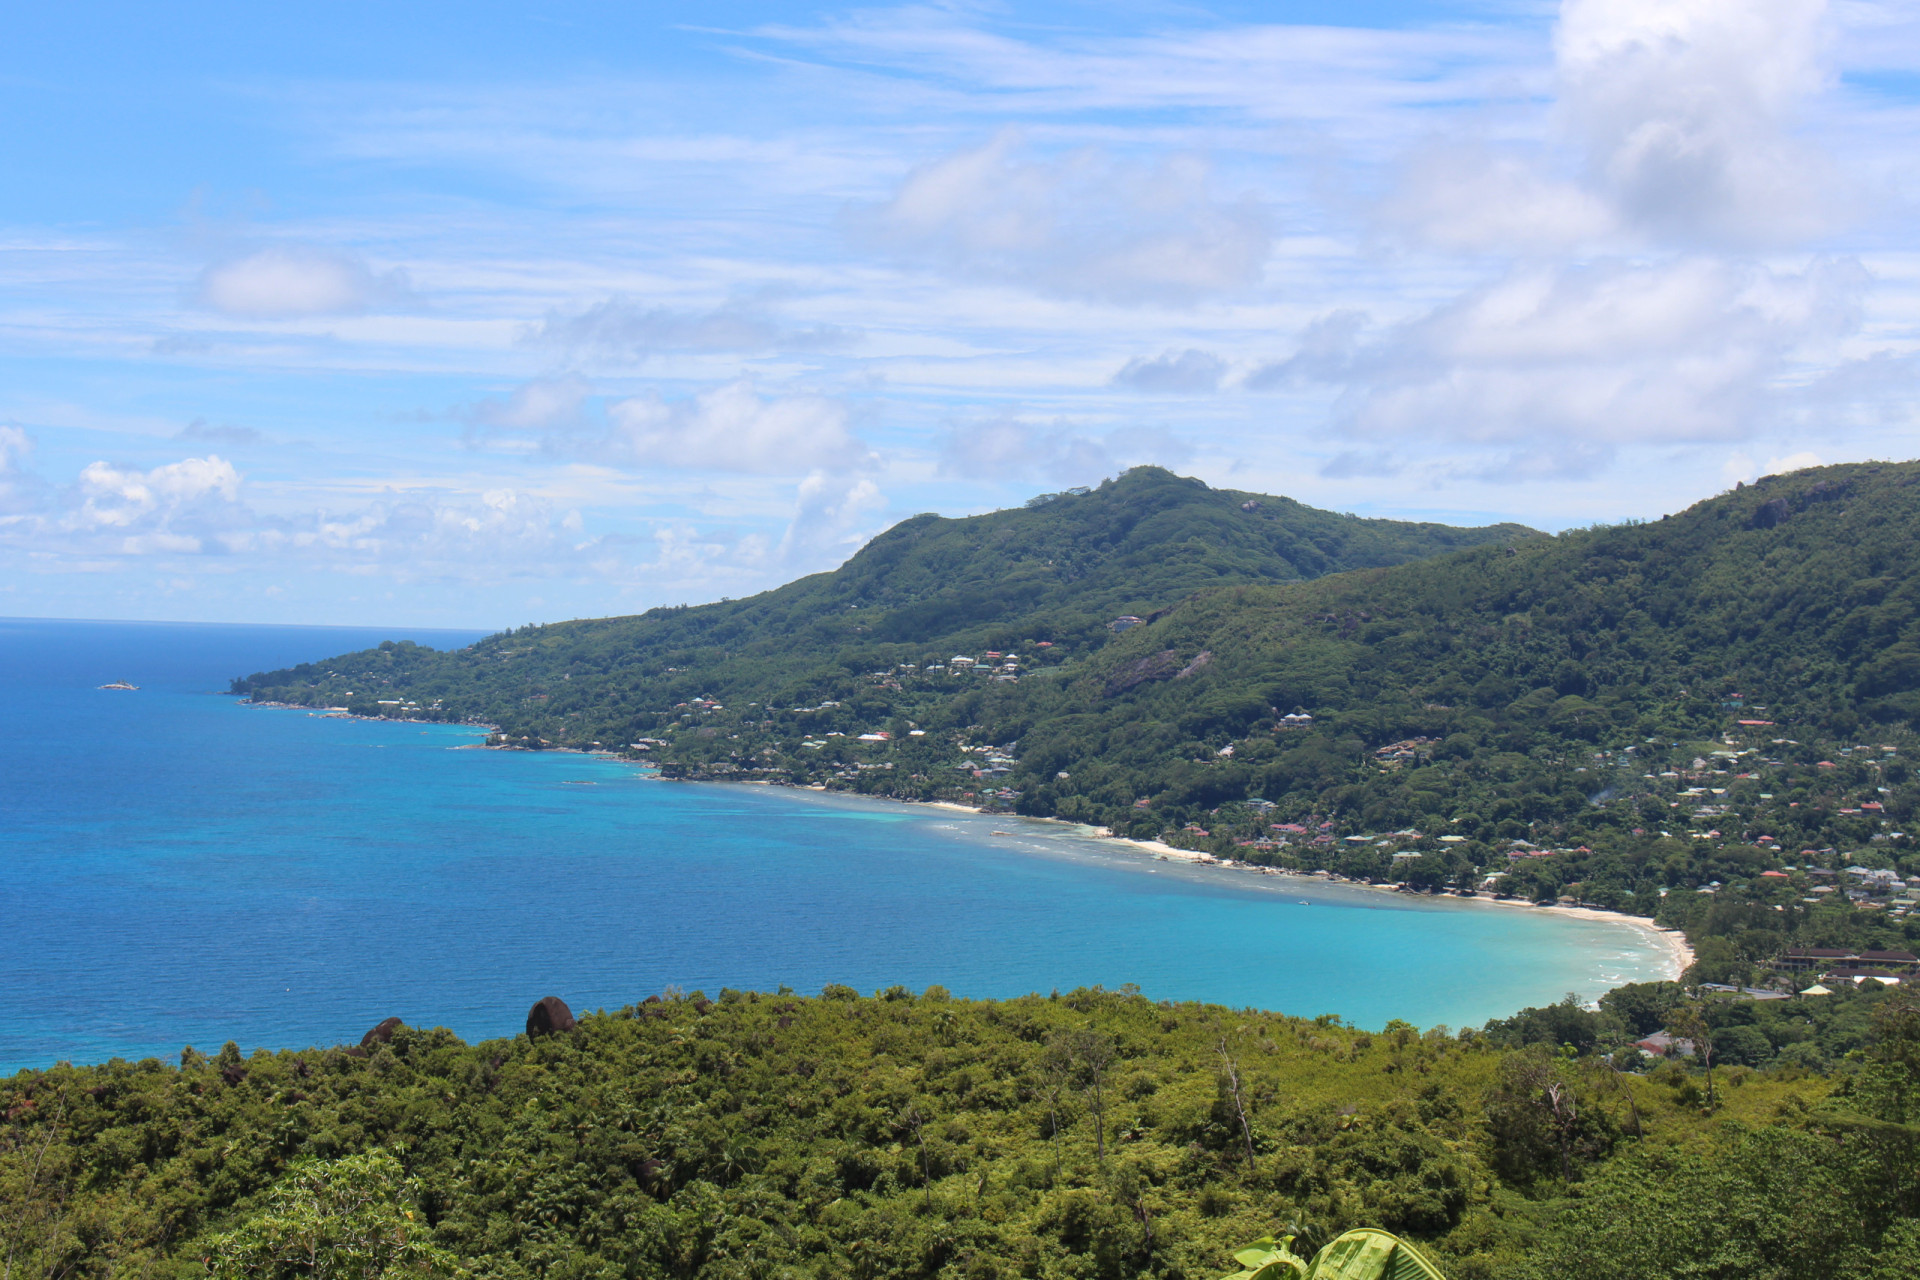 <p>Villa North Island in Seychelles boasts former guests like George and Amal Clooney and Prince William and Kate, who were rumored to have honeymooned here.</p>